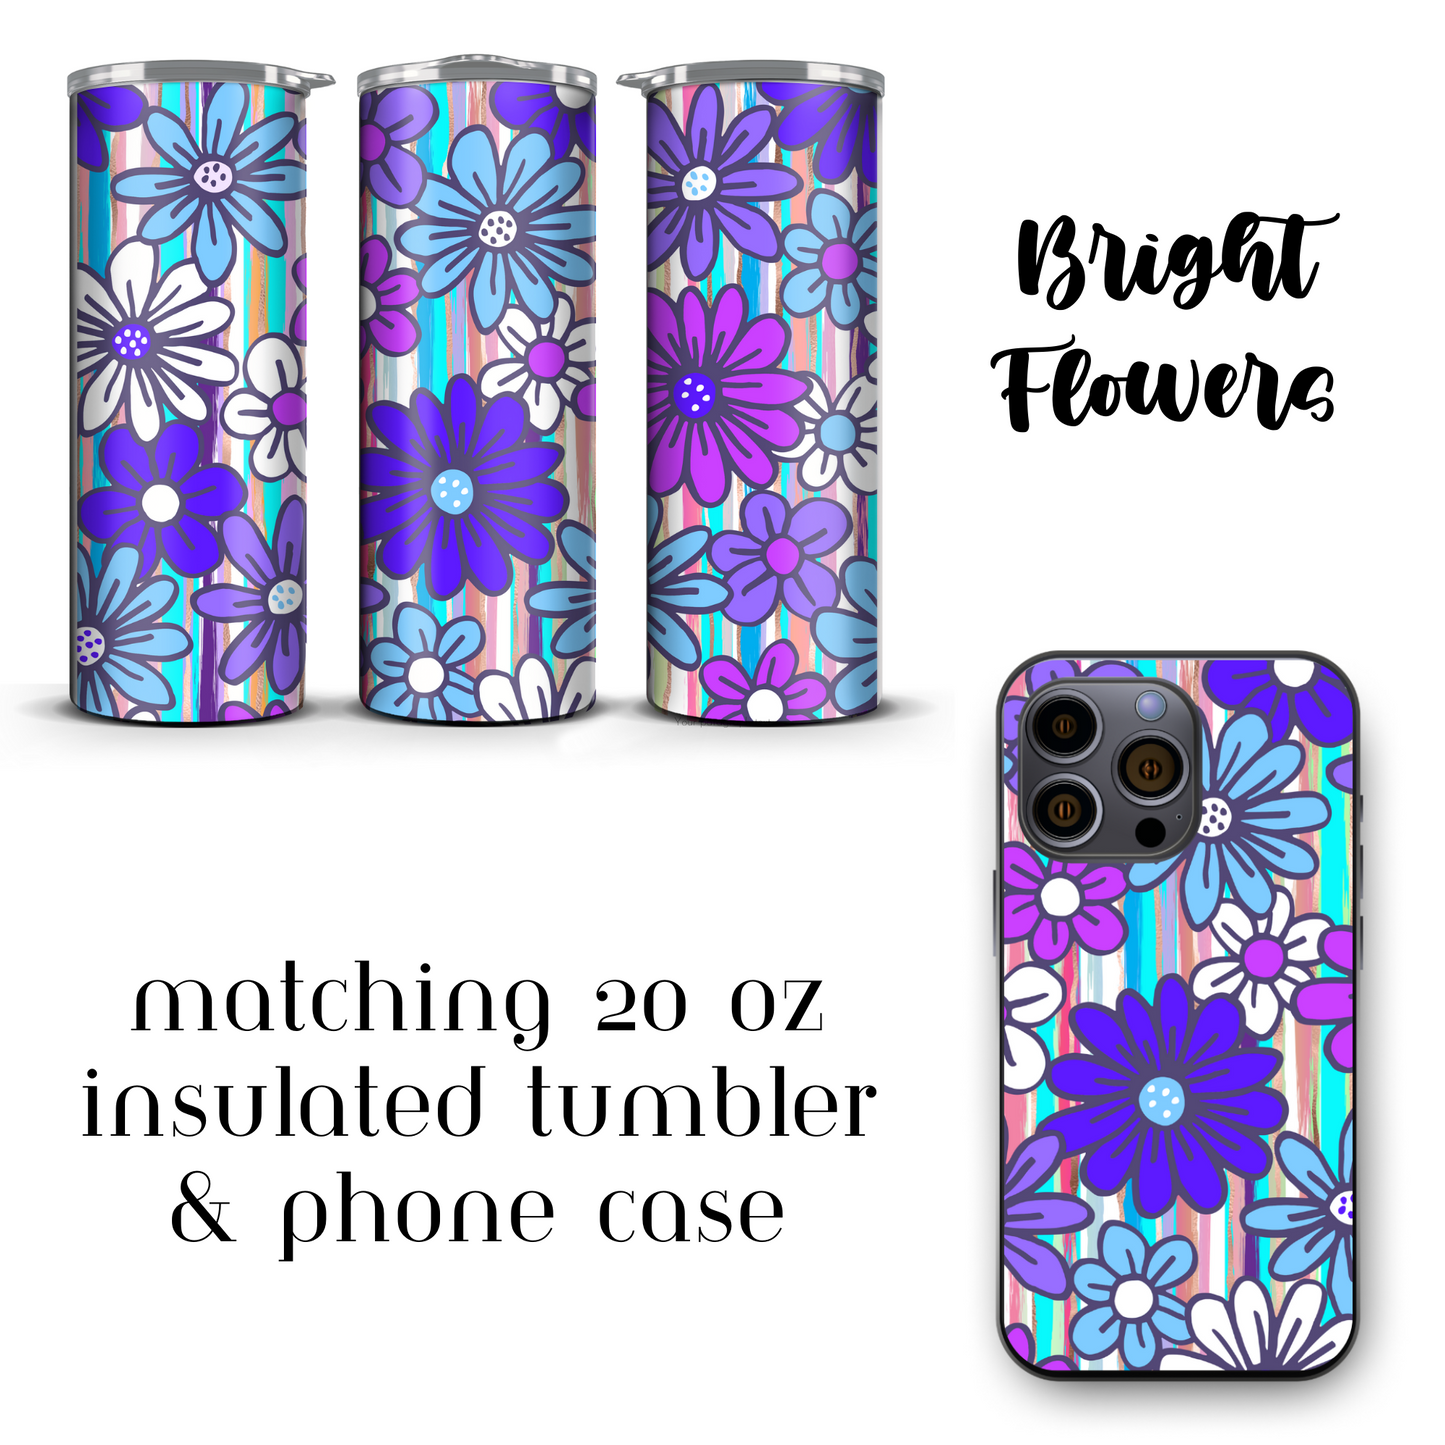 Floral Bliss: Purple, Blue, and Pink Bright Flower Tumbler & Phone Case Gift Set - Vibrant, Stylish, and Perfect for Flower Lovers